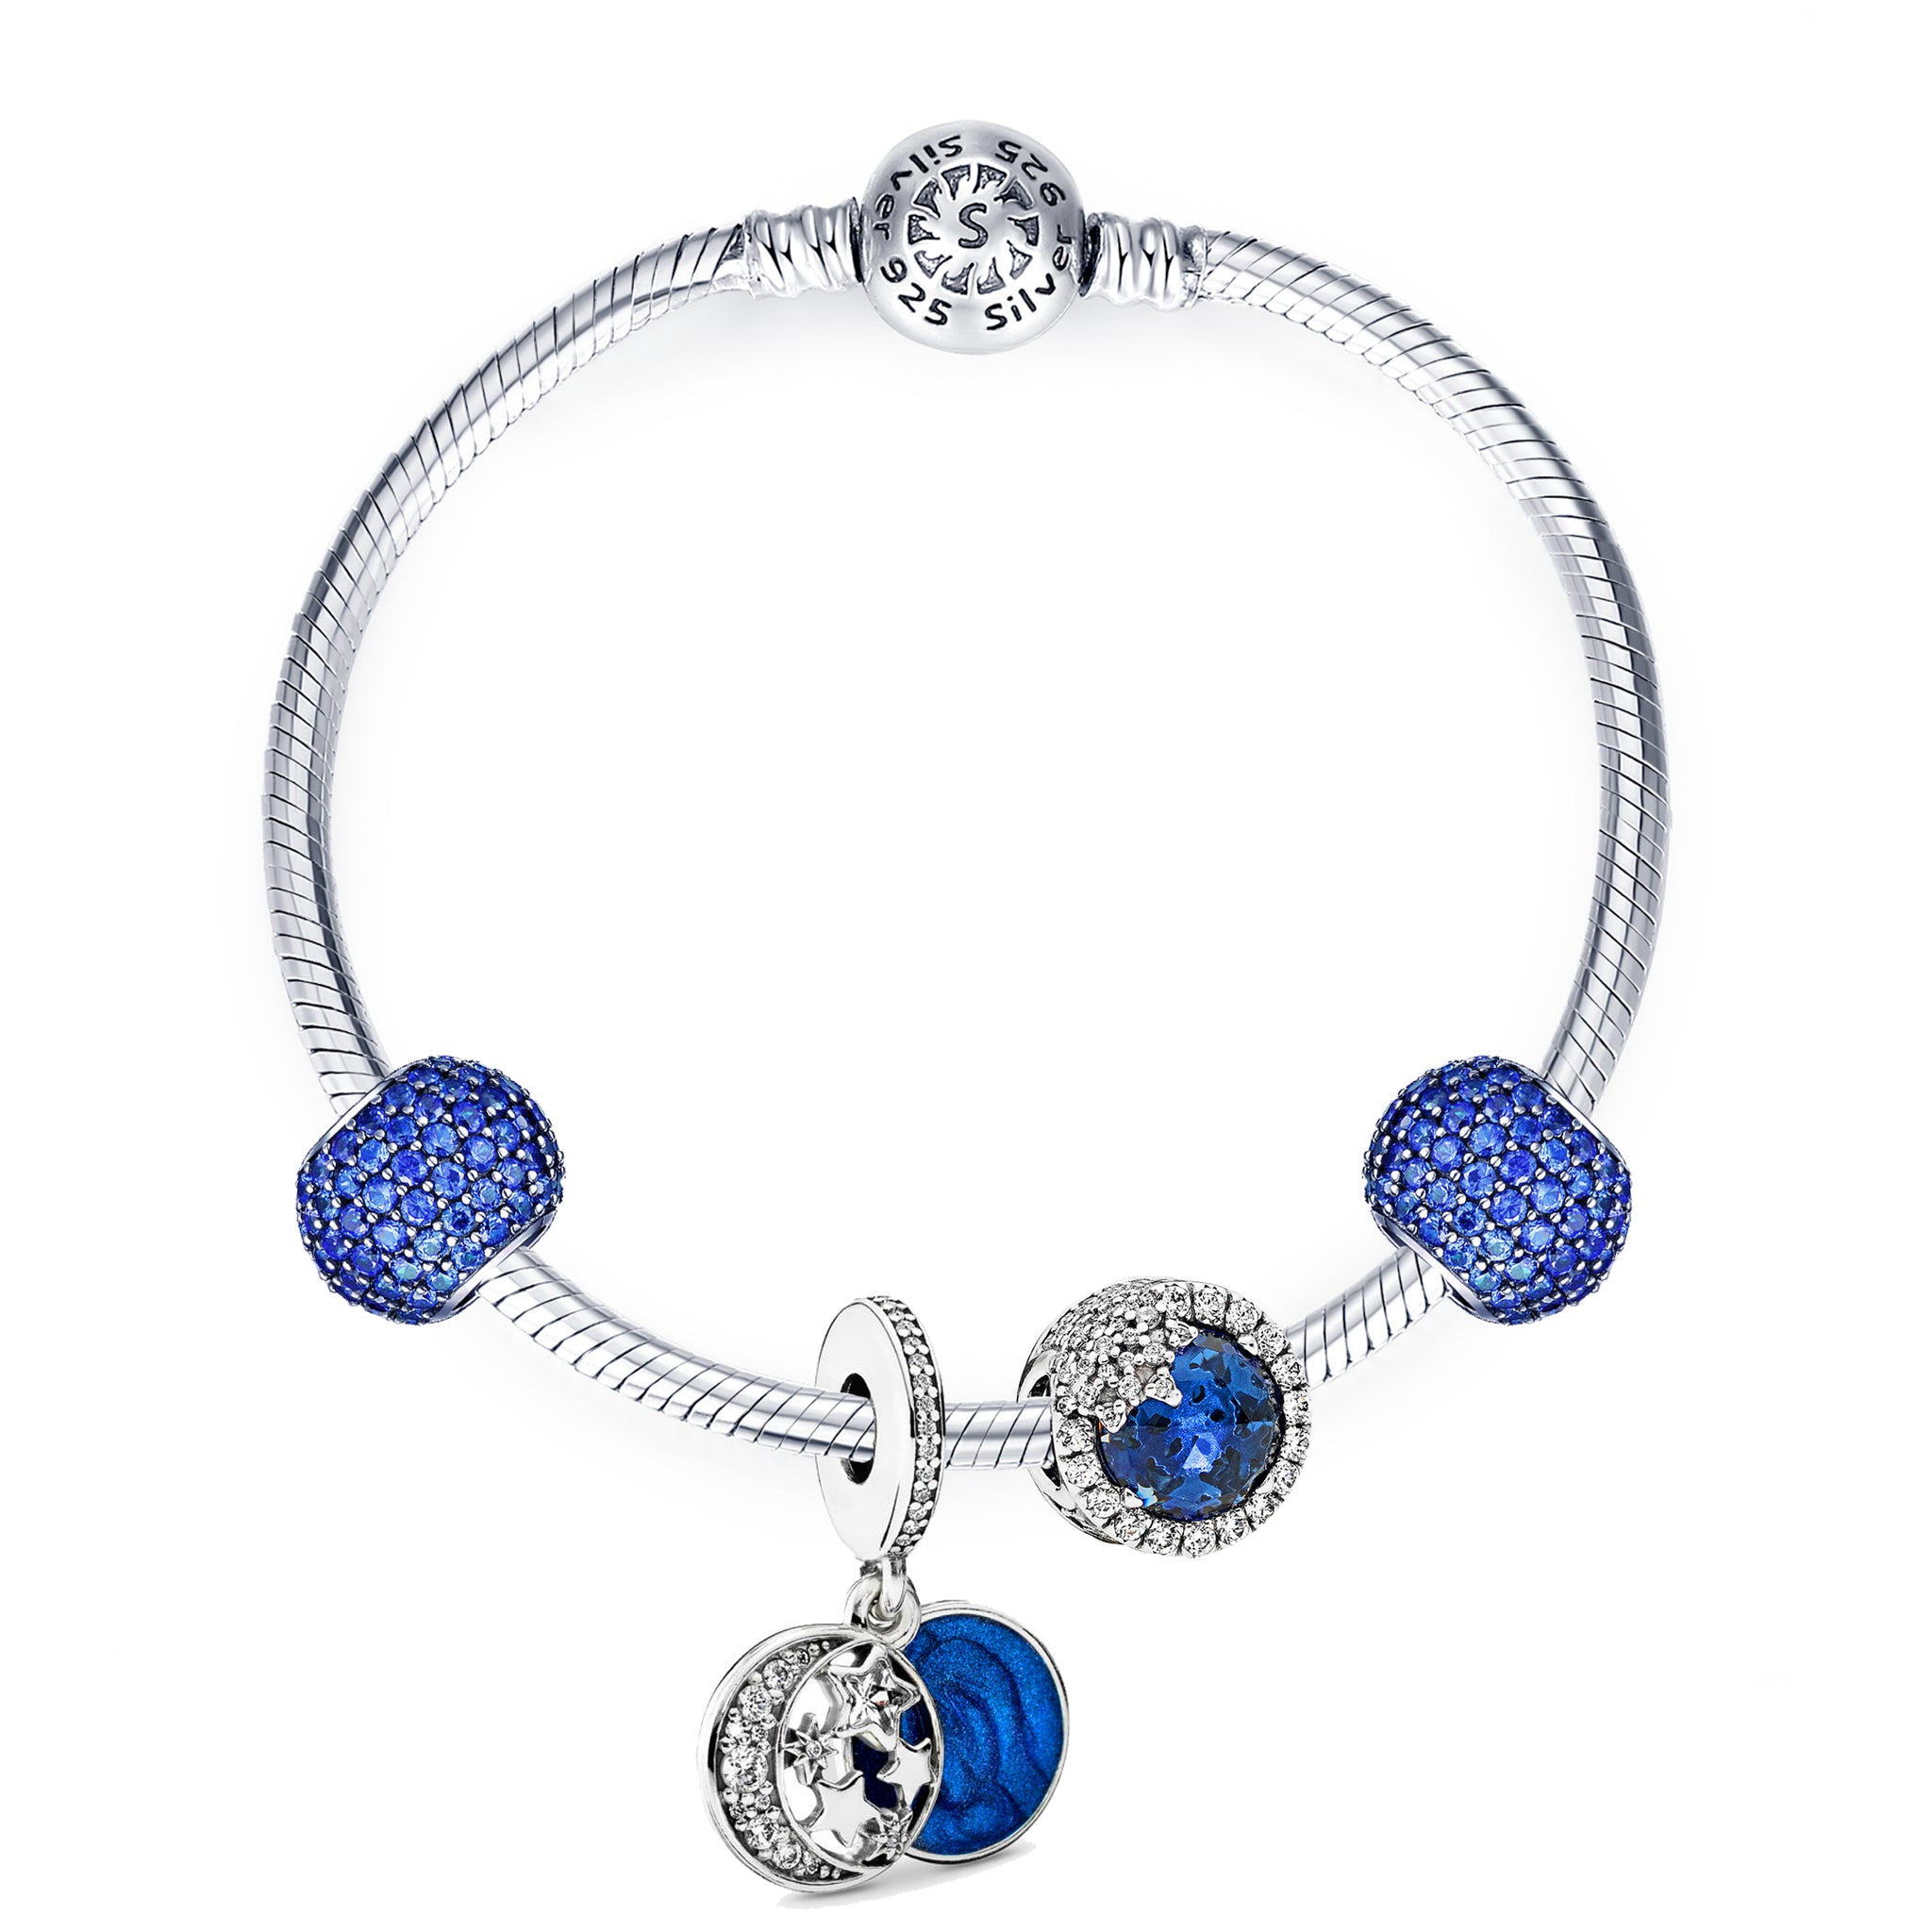 Jewdii 925 Silver Blue Moon and Stars Bracelet and Charm Set